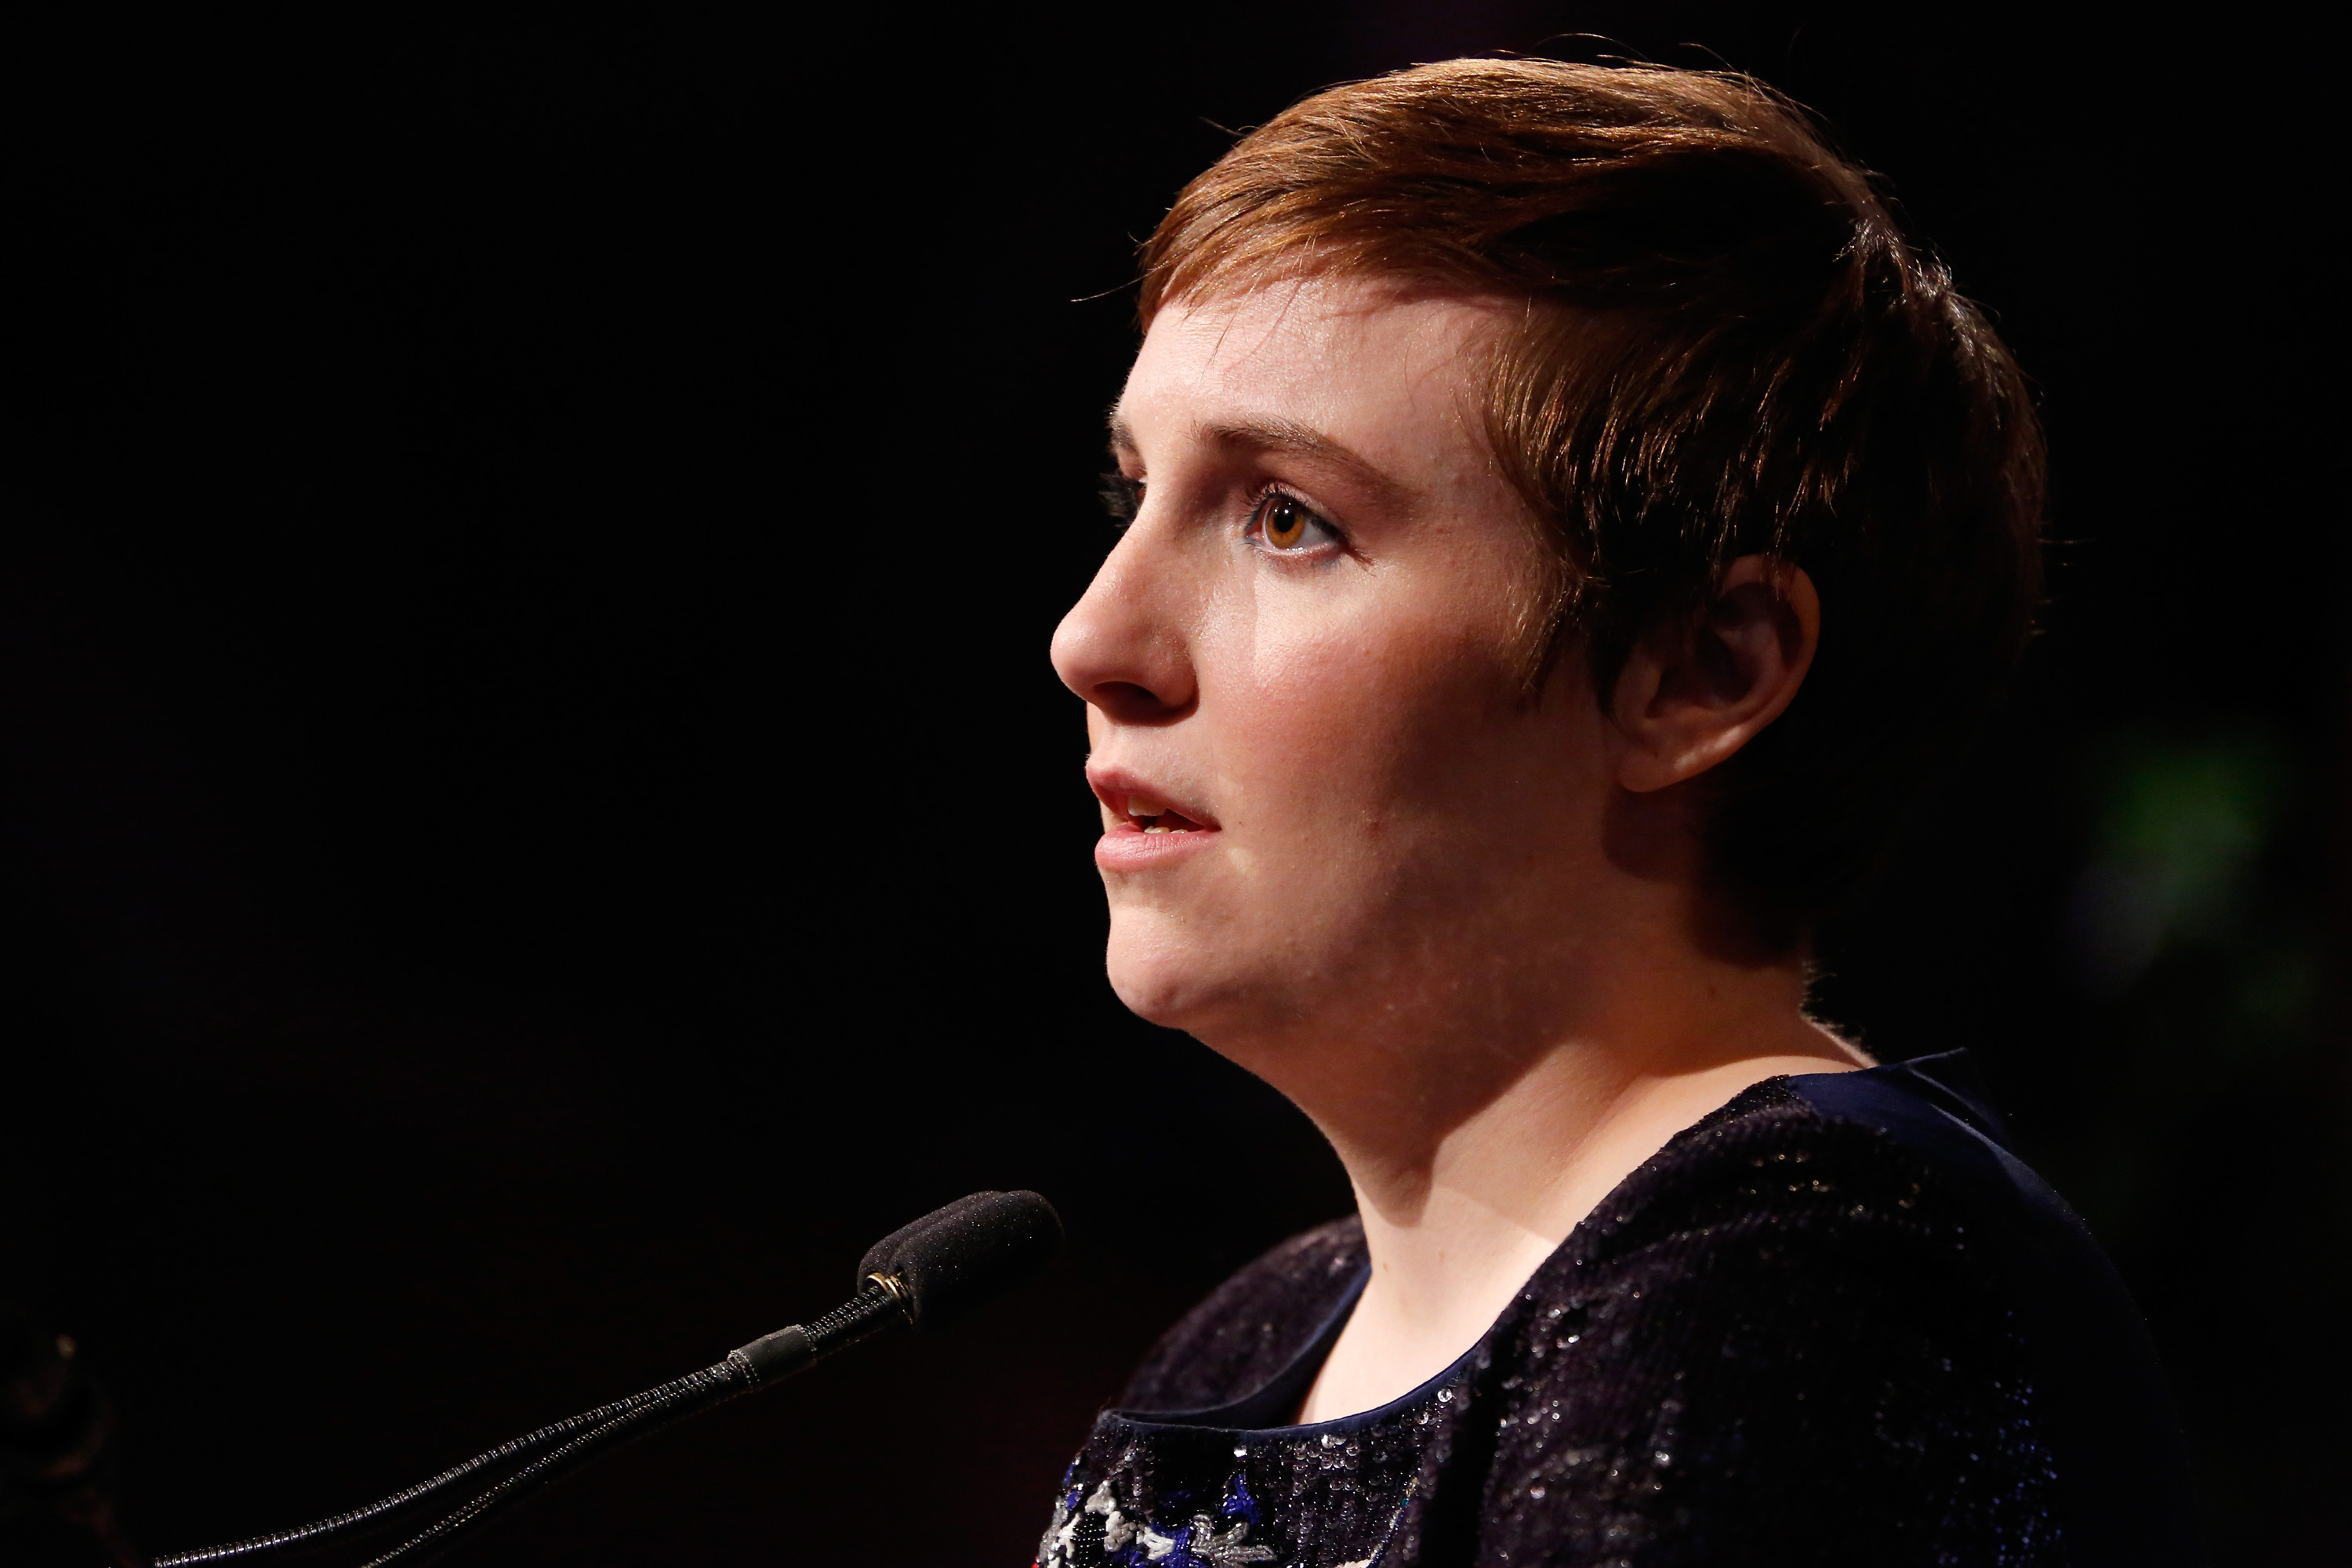 Honoree Lena Dunham speaks onstage at Variety's Power of Women: New York presented by Lifetime at Cipriani 42nd Street on April 24, 2015 in New York City.